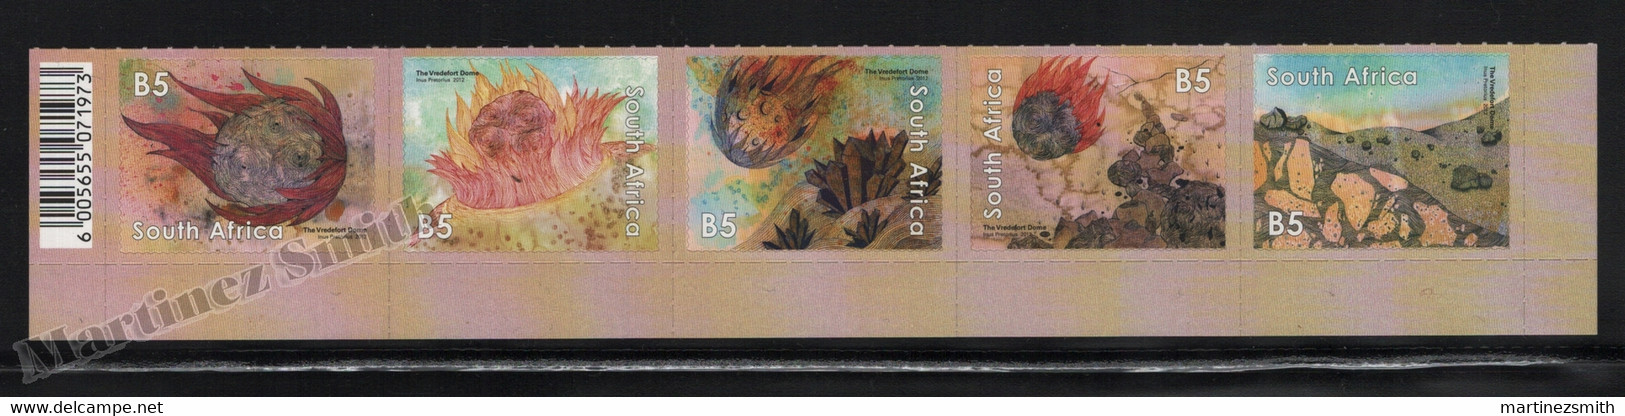 Afrique Du Sud - South Africa 2012 Yvert 1690-94, The Vredefort Dome - Adhesive Full Strip - MNH - Unused Stamps